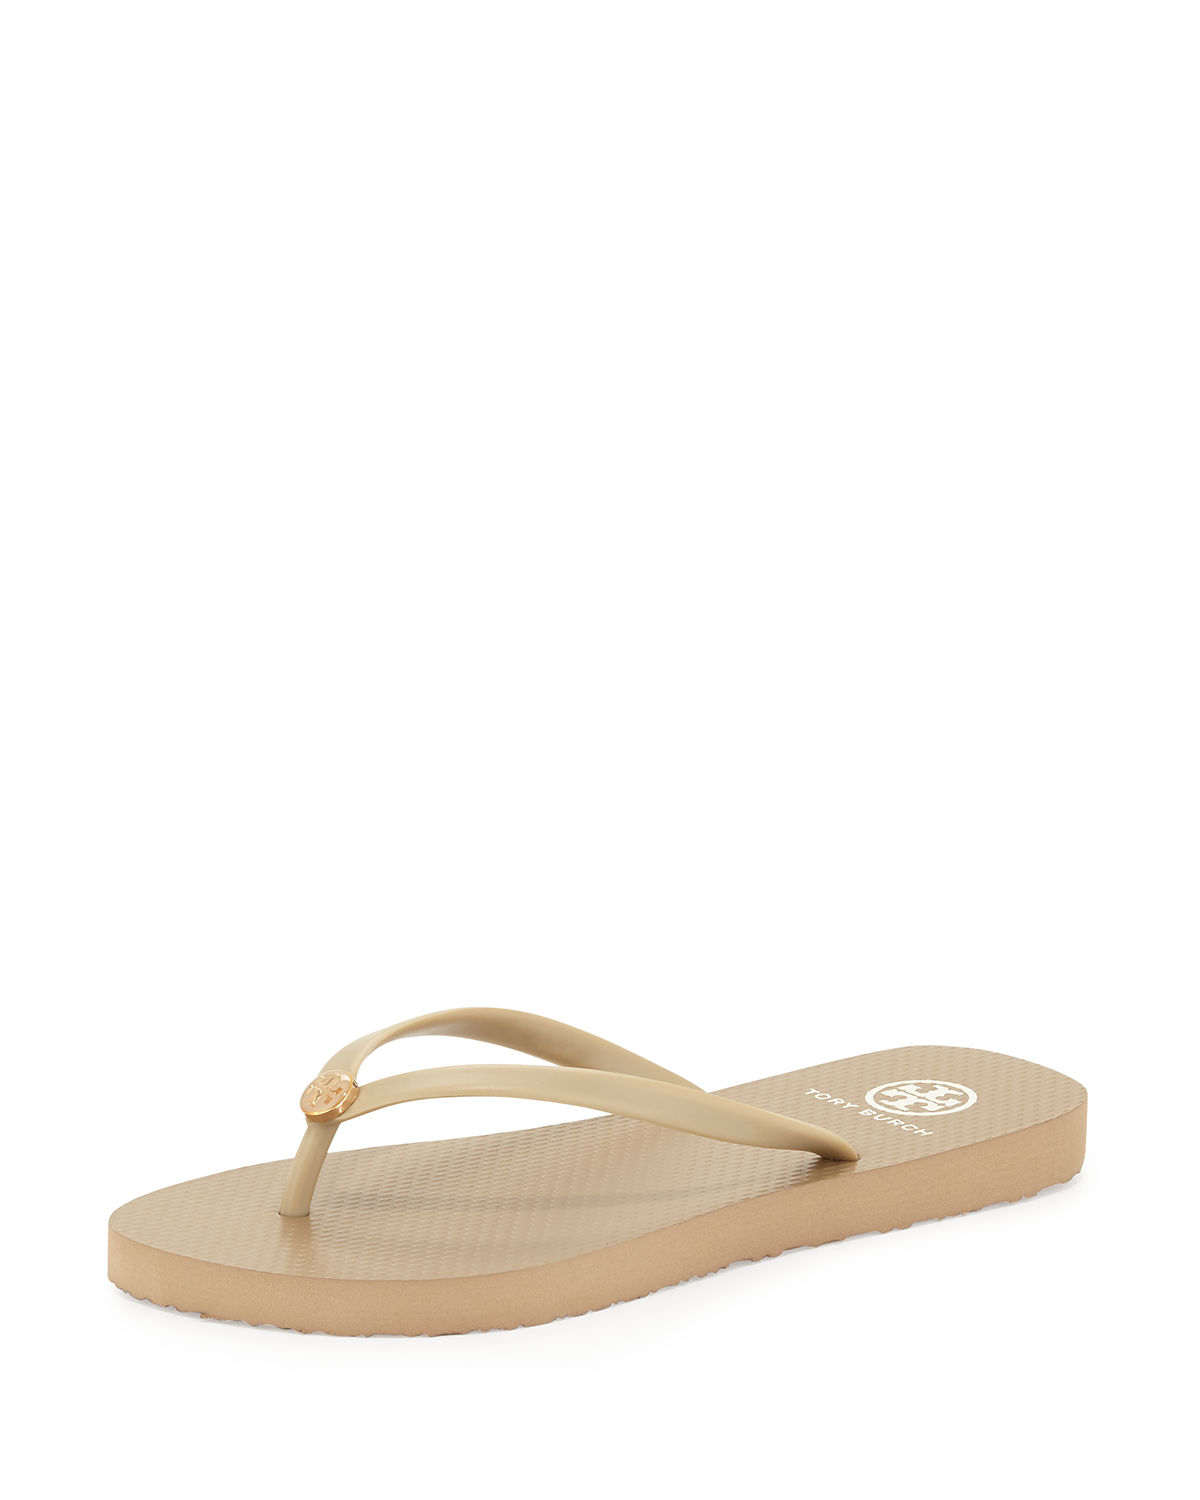 Lyst - Tory Burch Logo Rubber Flip-flop in Natural